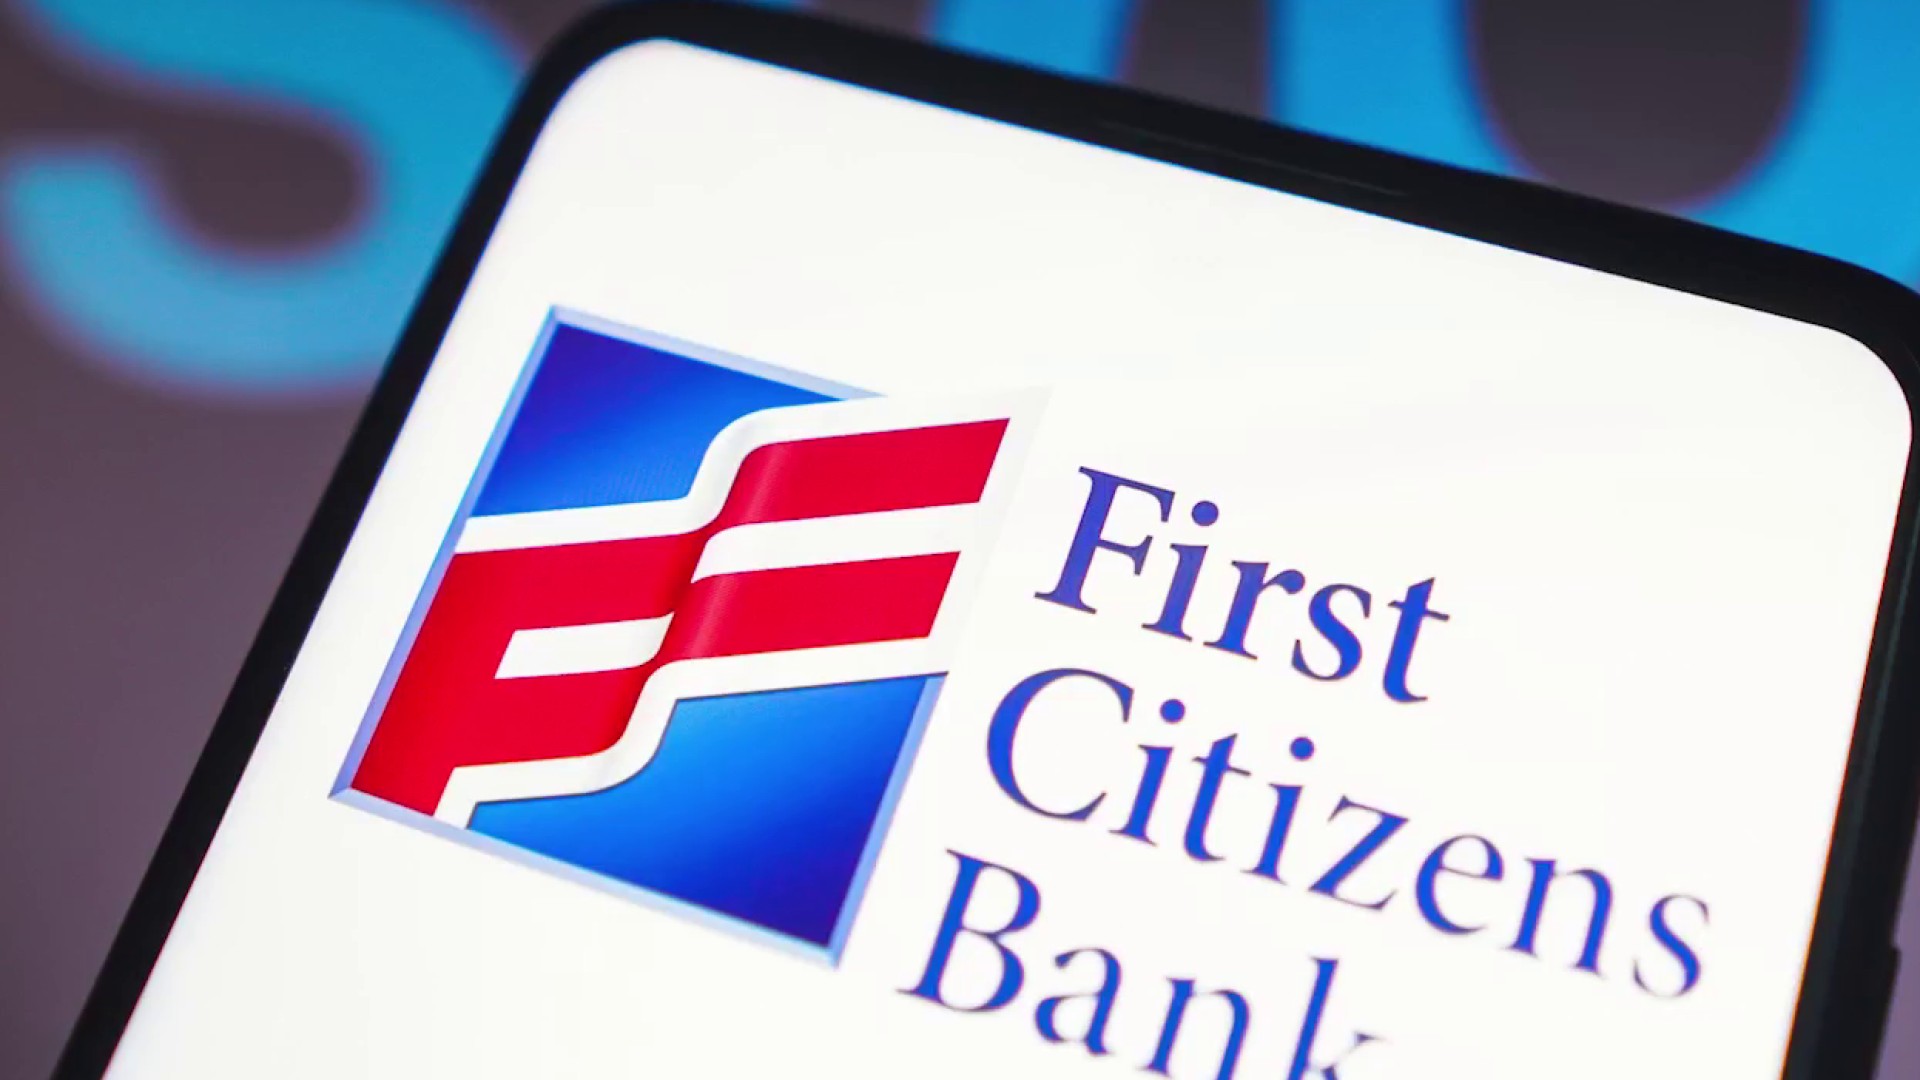 citizens bank and trust logo